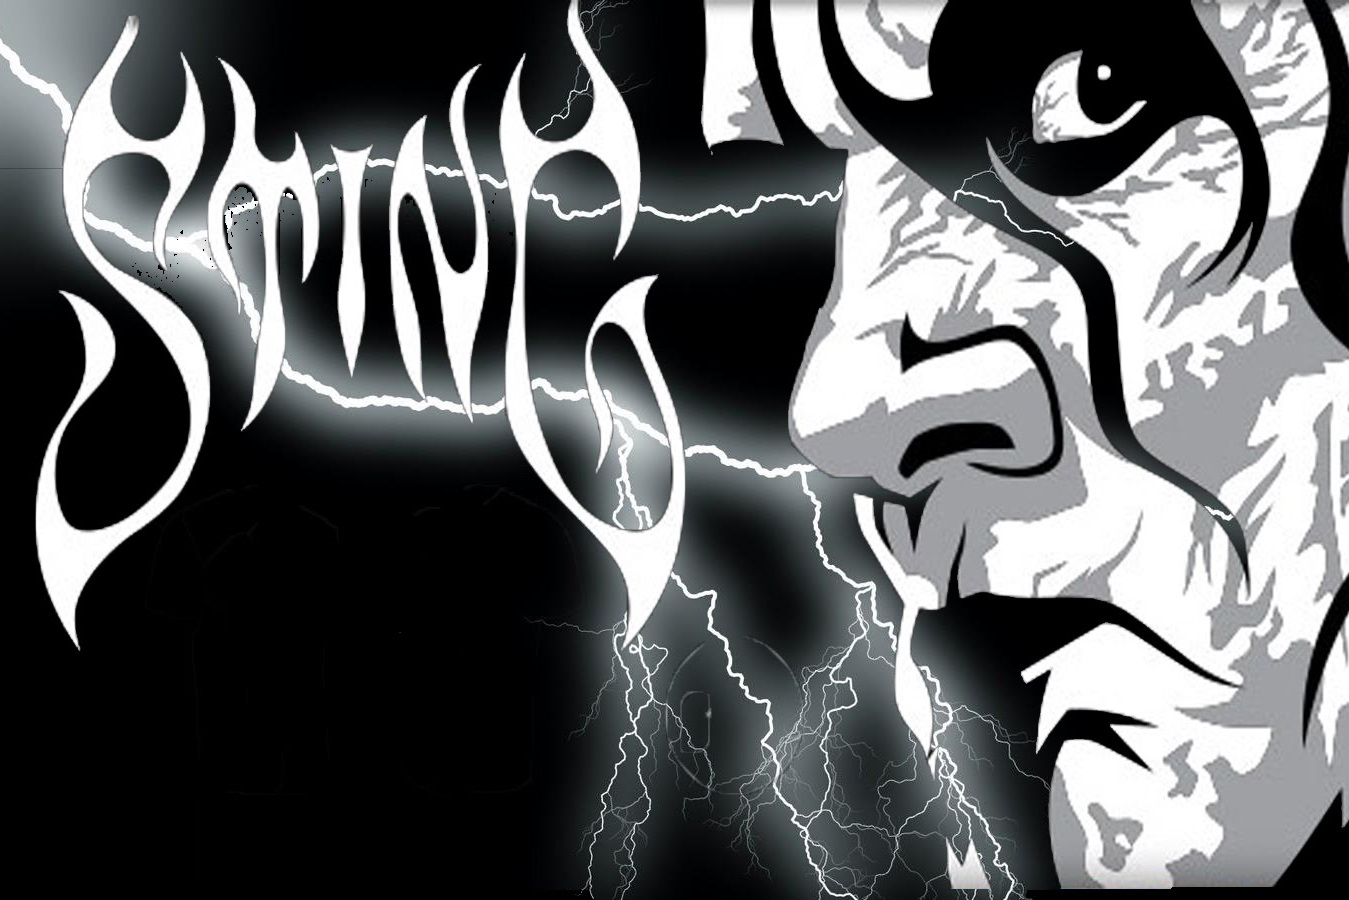 wwe sting wallpaper, font, fictional character, graphic design, illustration, black and white